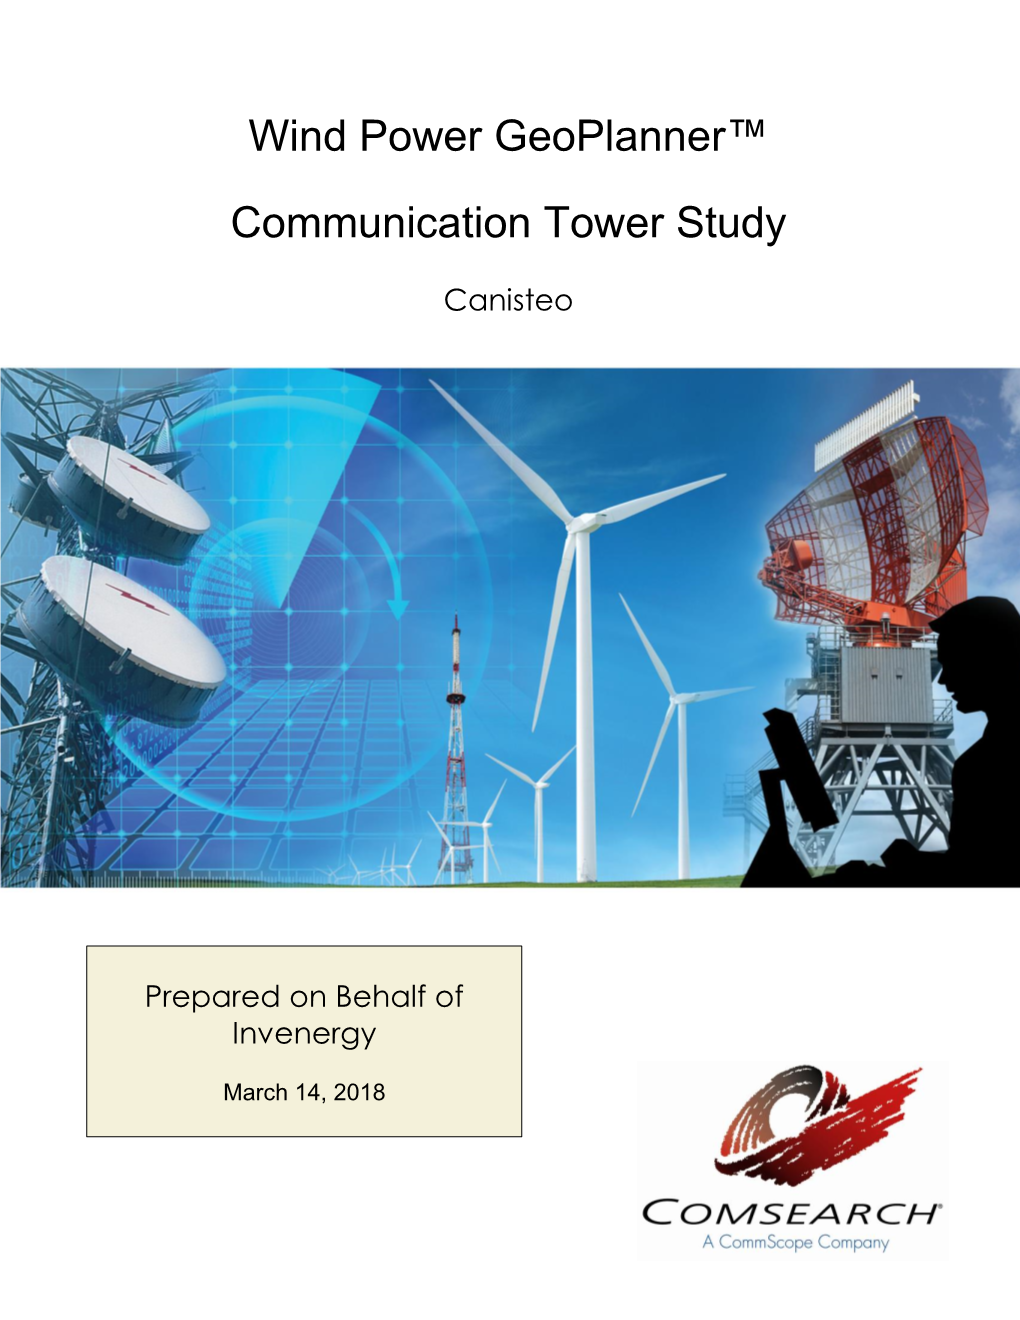 Wind Power Geoplanner™ Communication Tower Study Canisteo